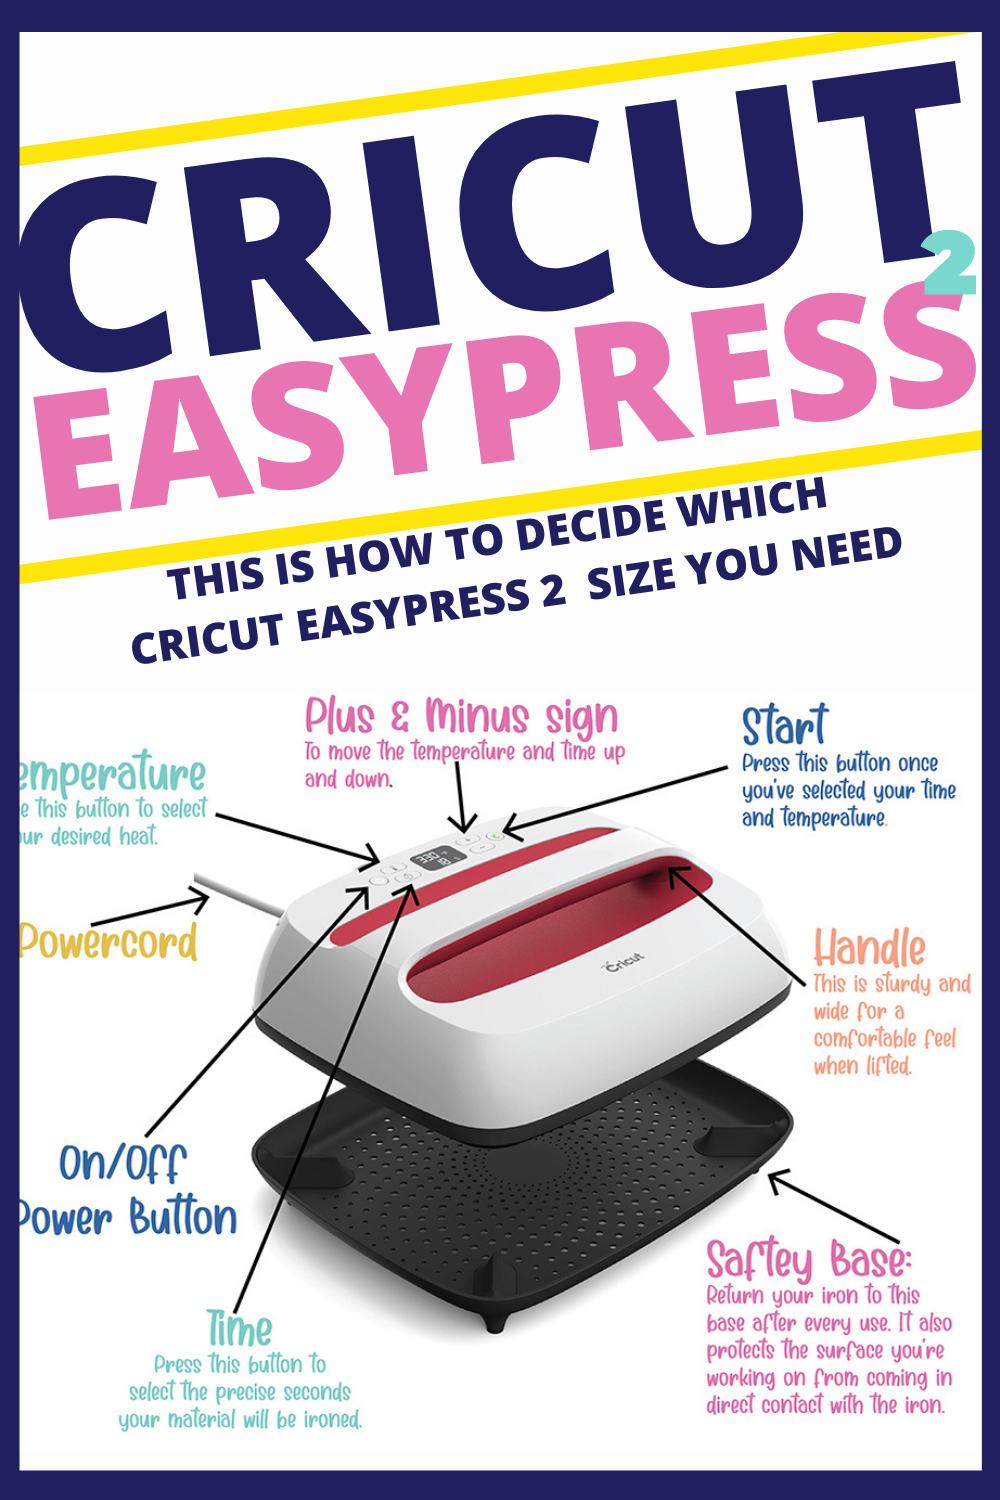 EasyPress 2: All you need to know & how to use it